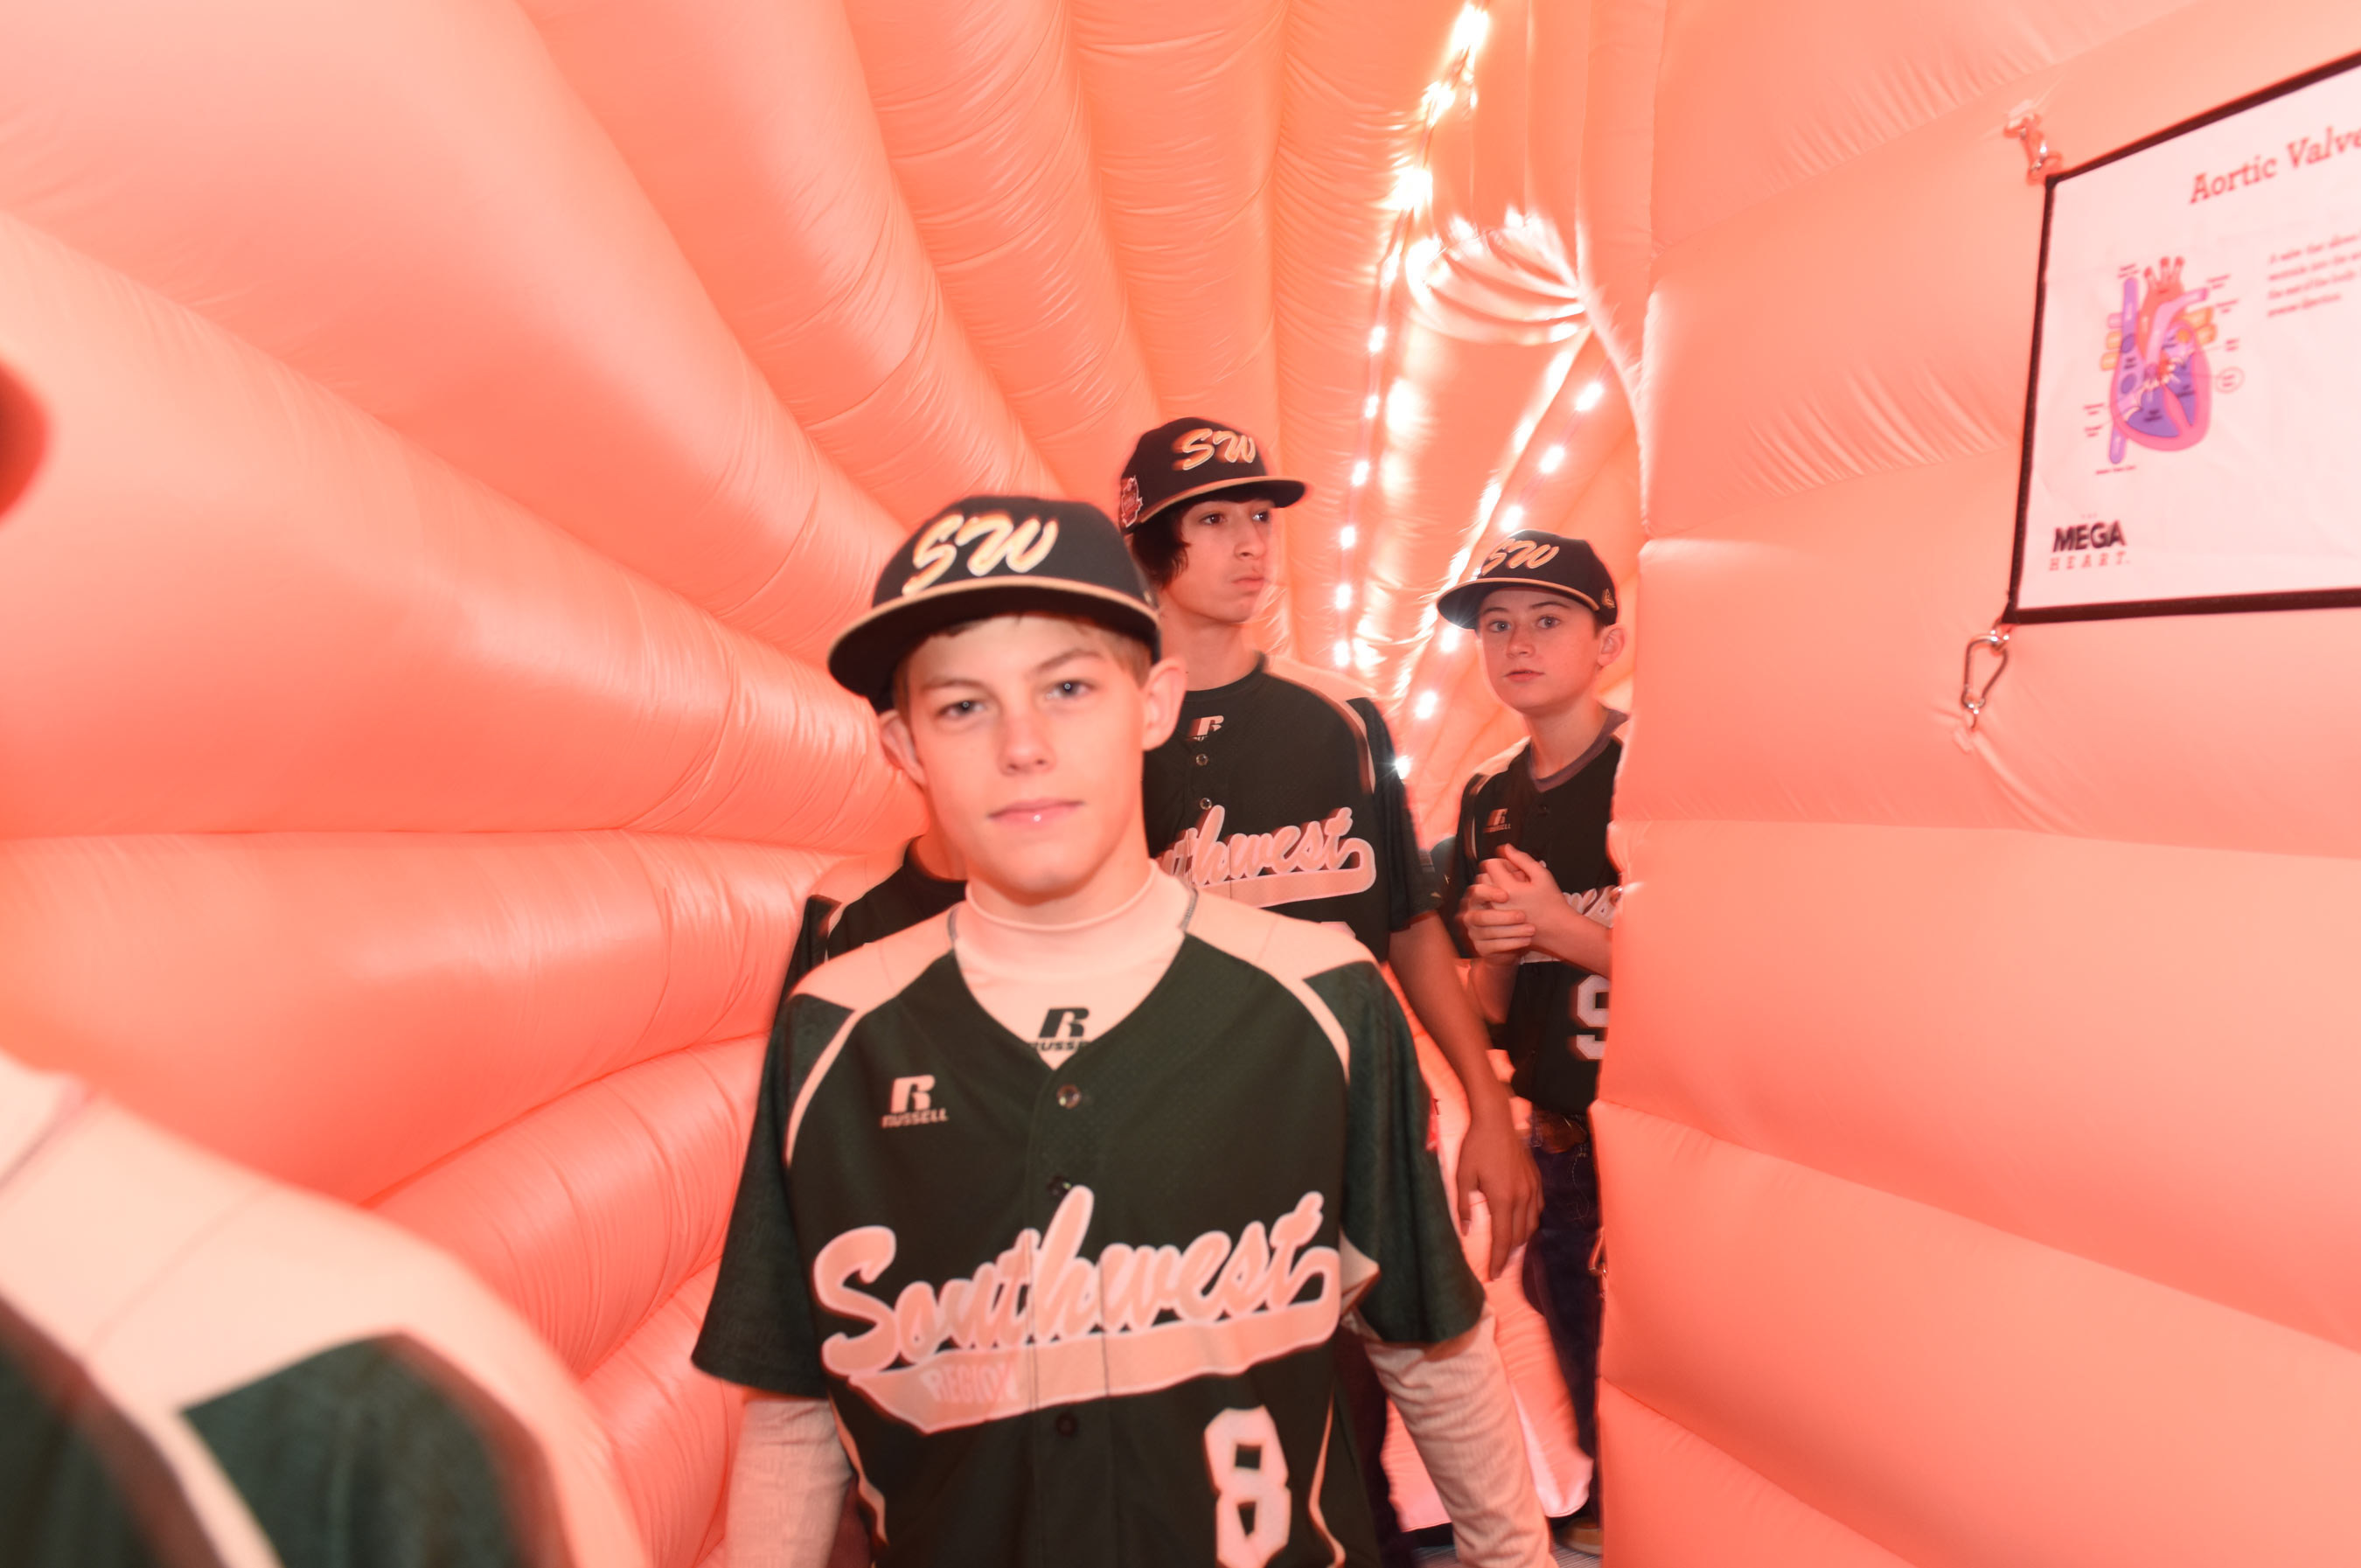 The Pearland East Little League toured the Mega Heart, the world's only portable, walk through heart exhibit at Pearland Medical Center's Community Event.